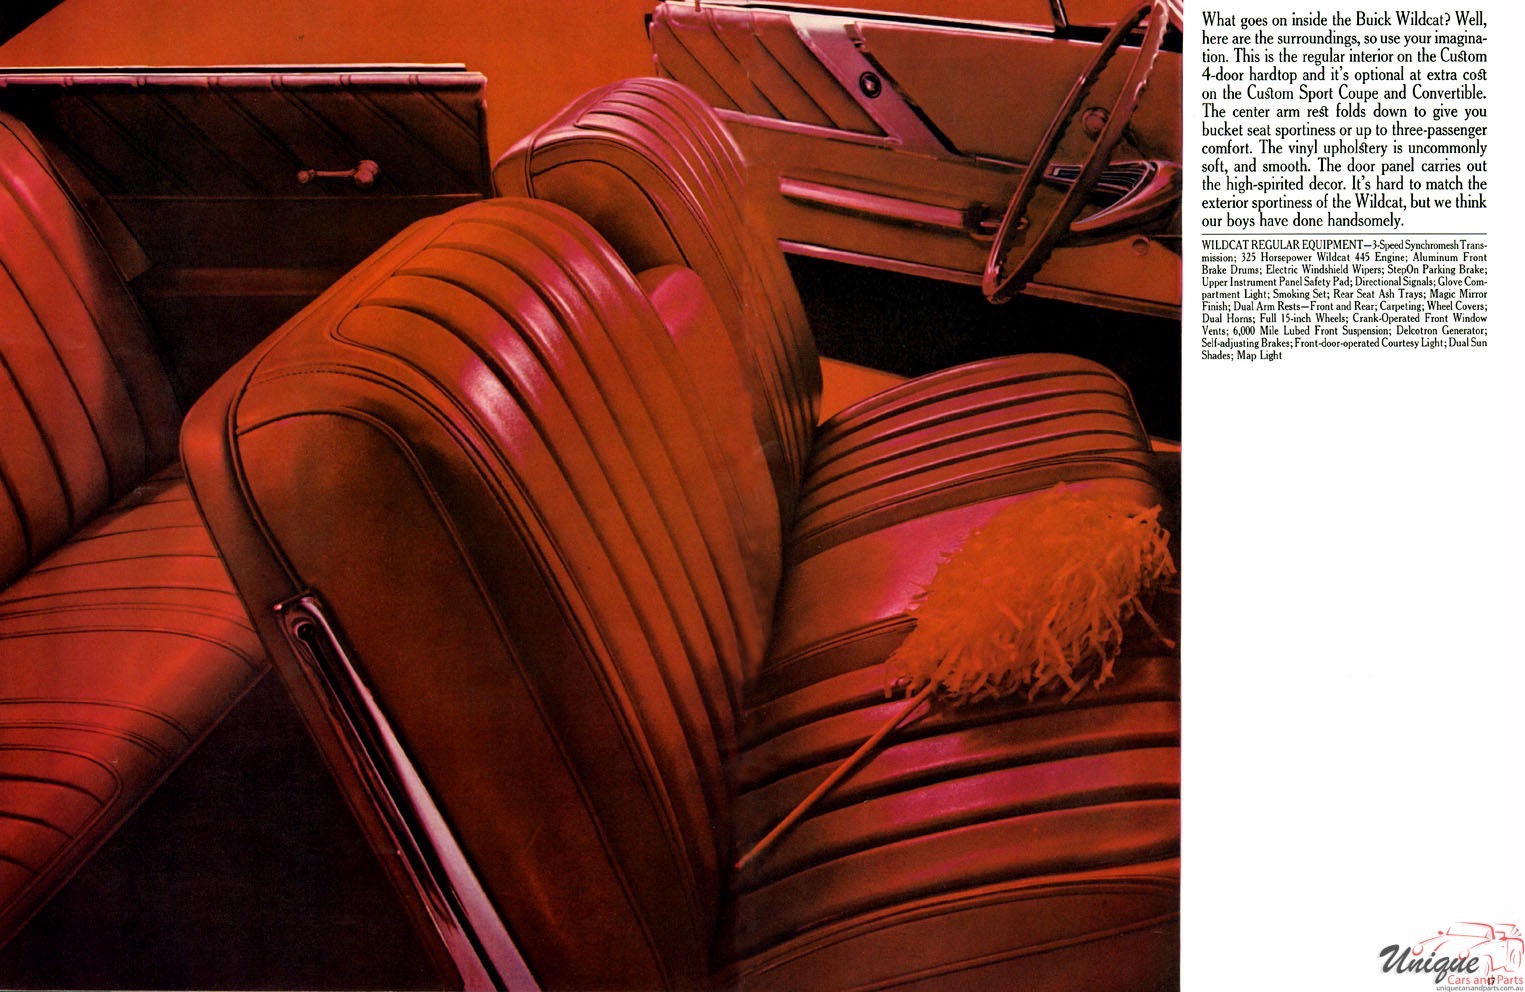 1965 Buick Full-Line All Models Brochure Page 1